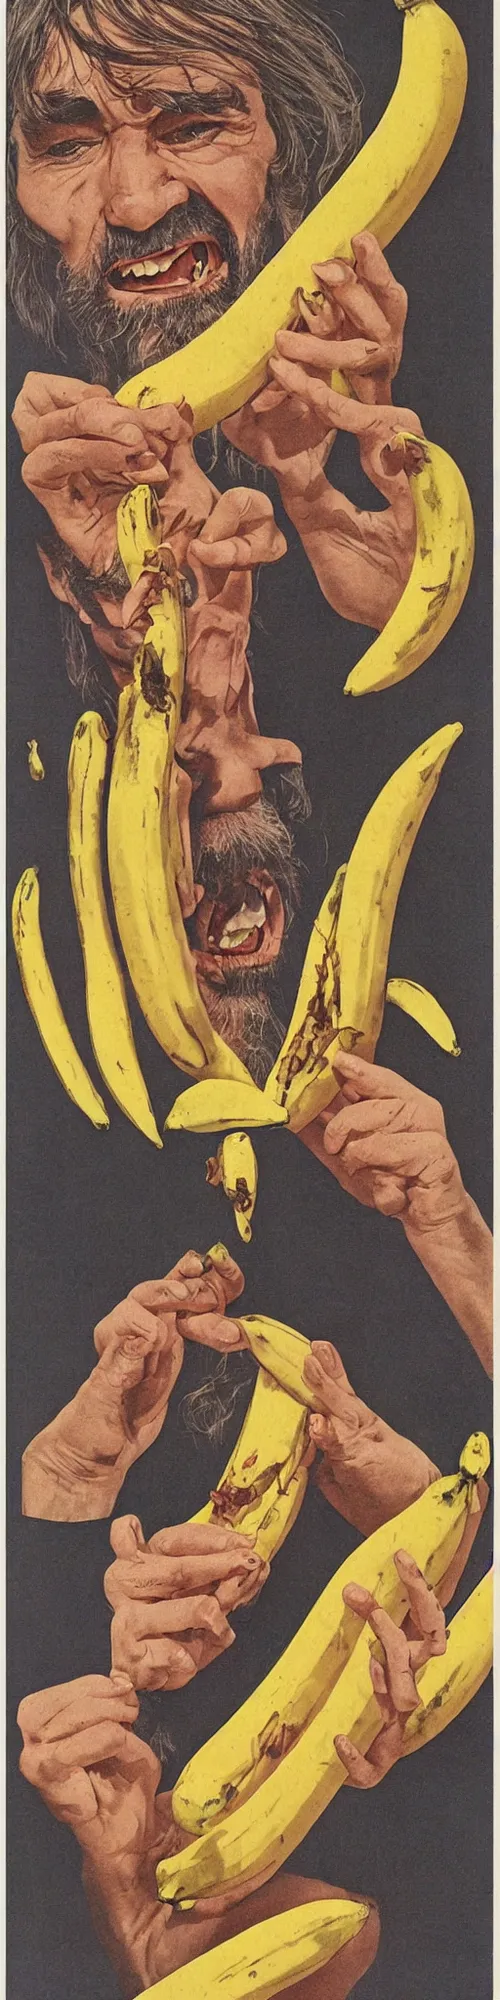 Prompt: vintage magazine advertisement depicting charles manson slipping on a banana peel, by alex grey